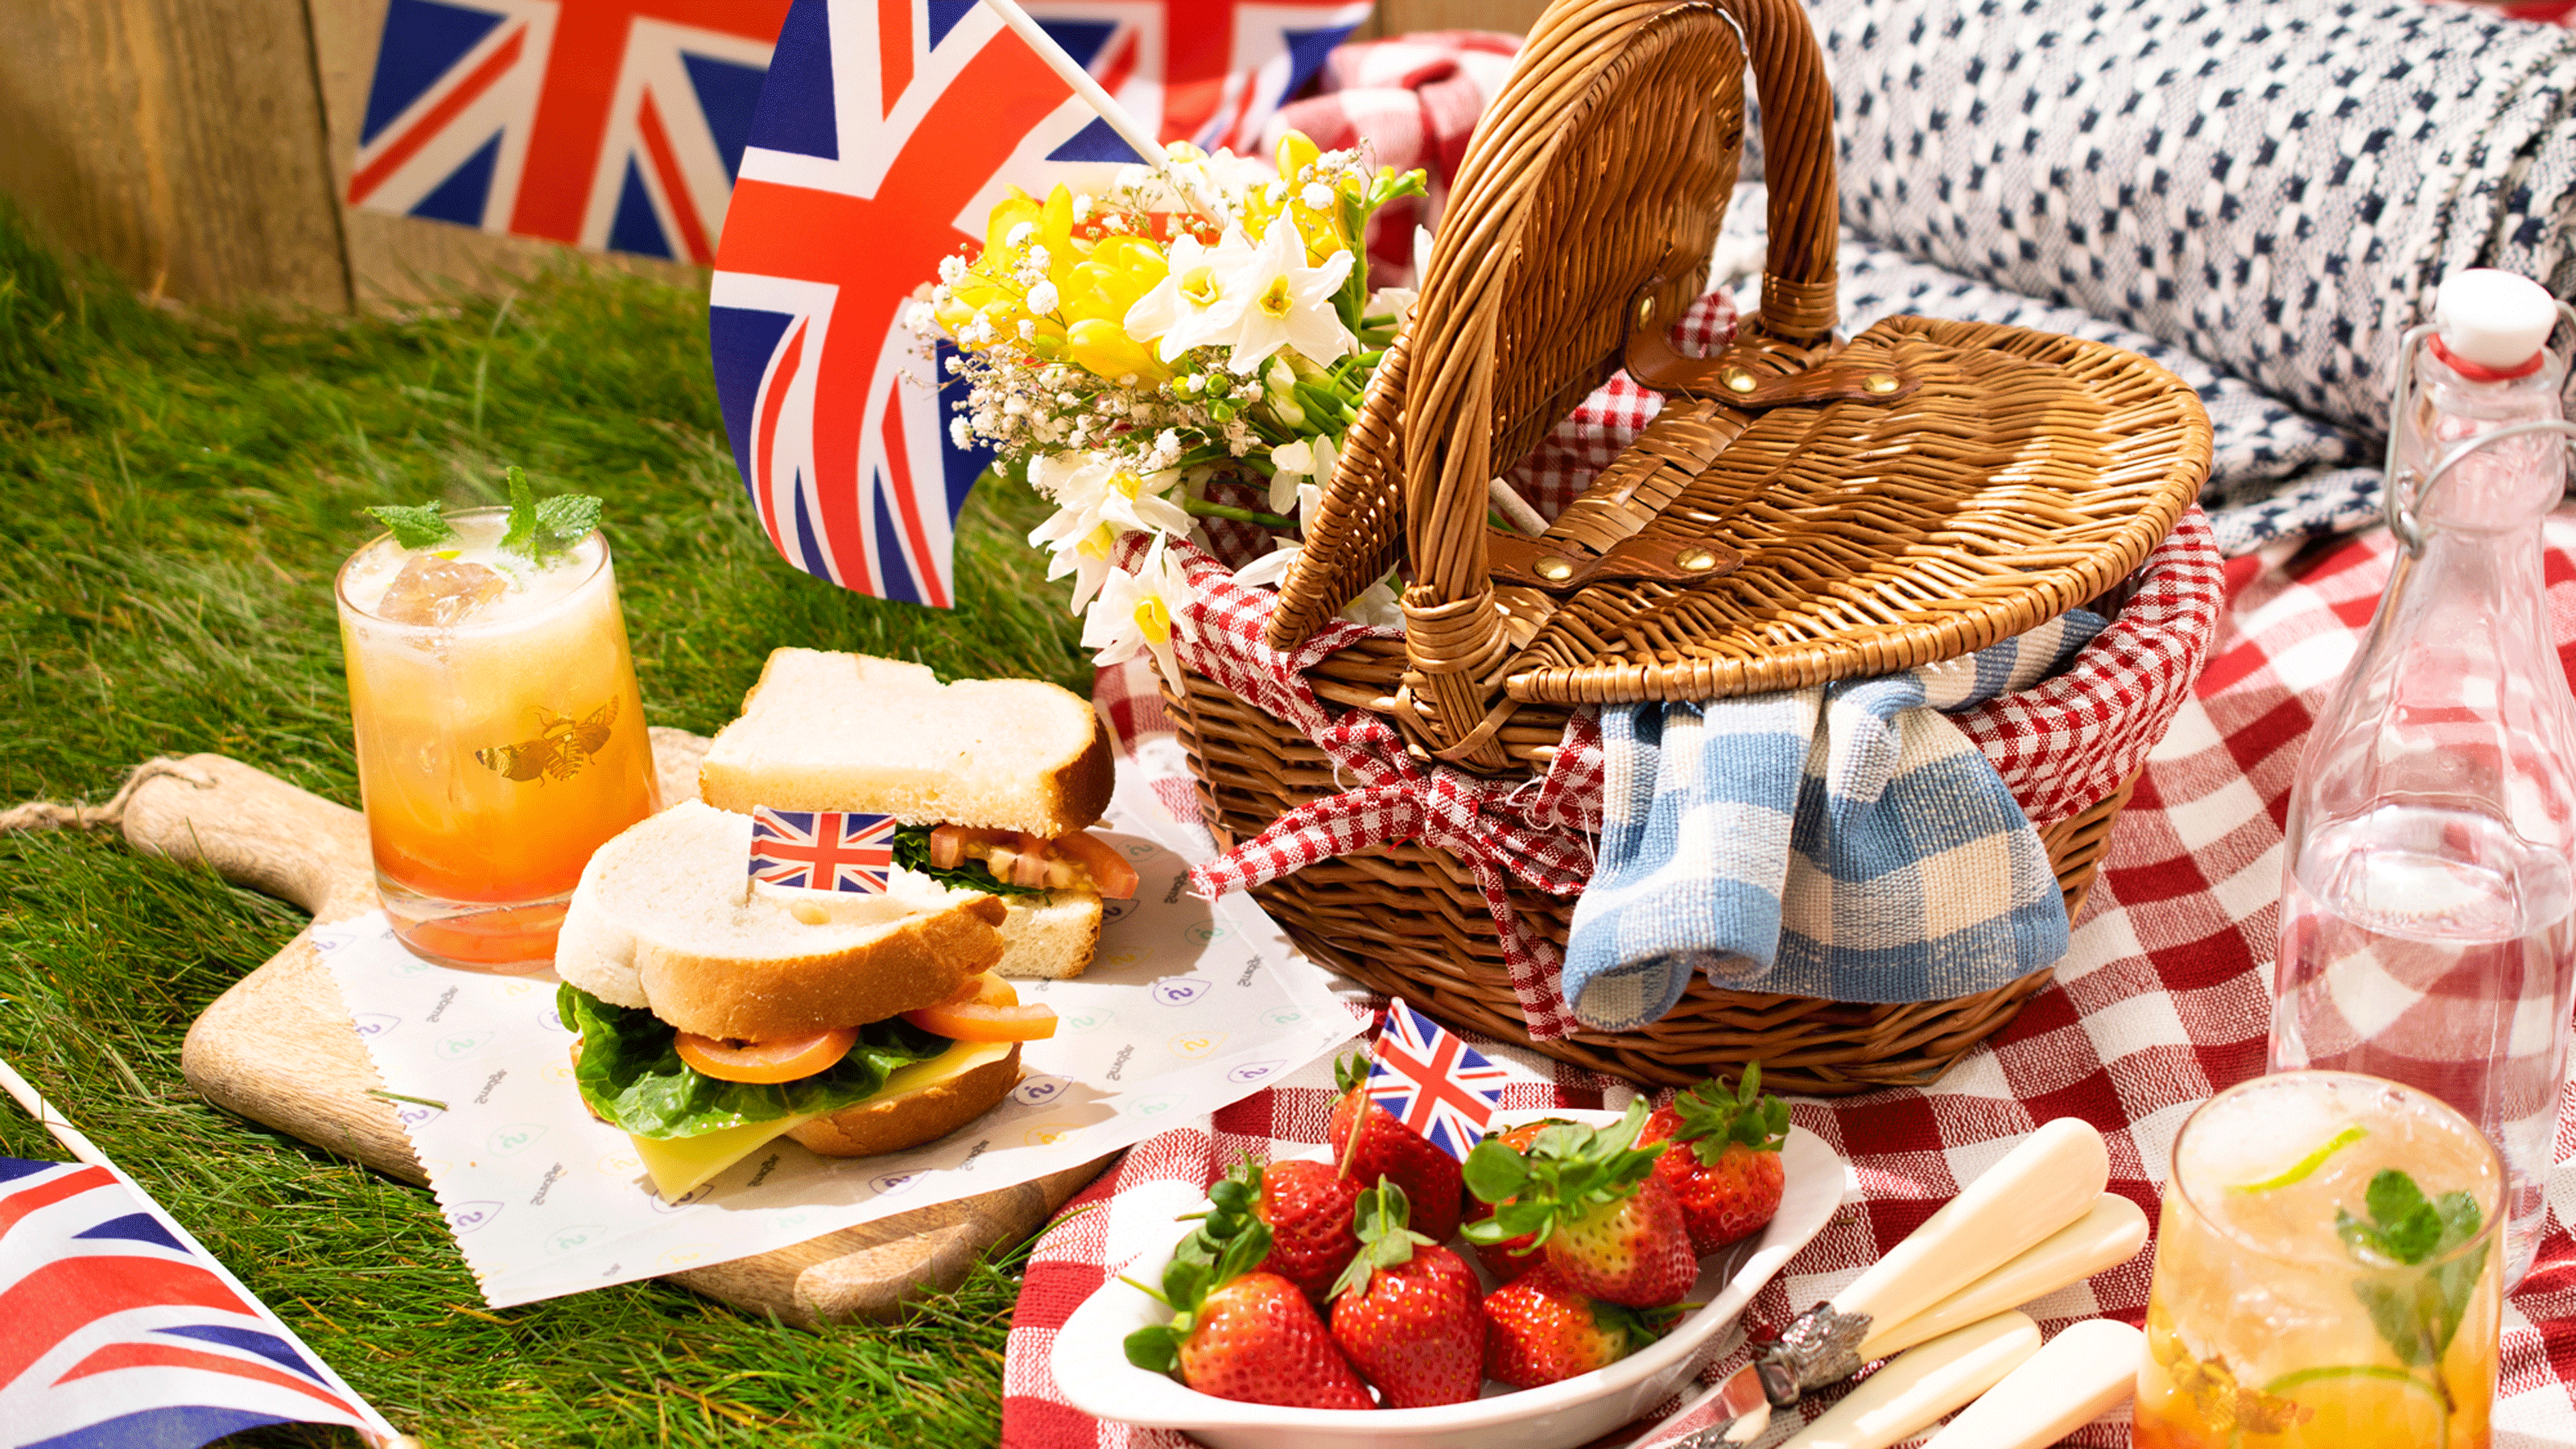 coronation picnic with union jack flags in baskets